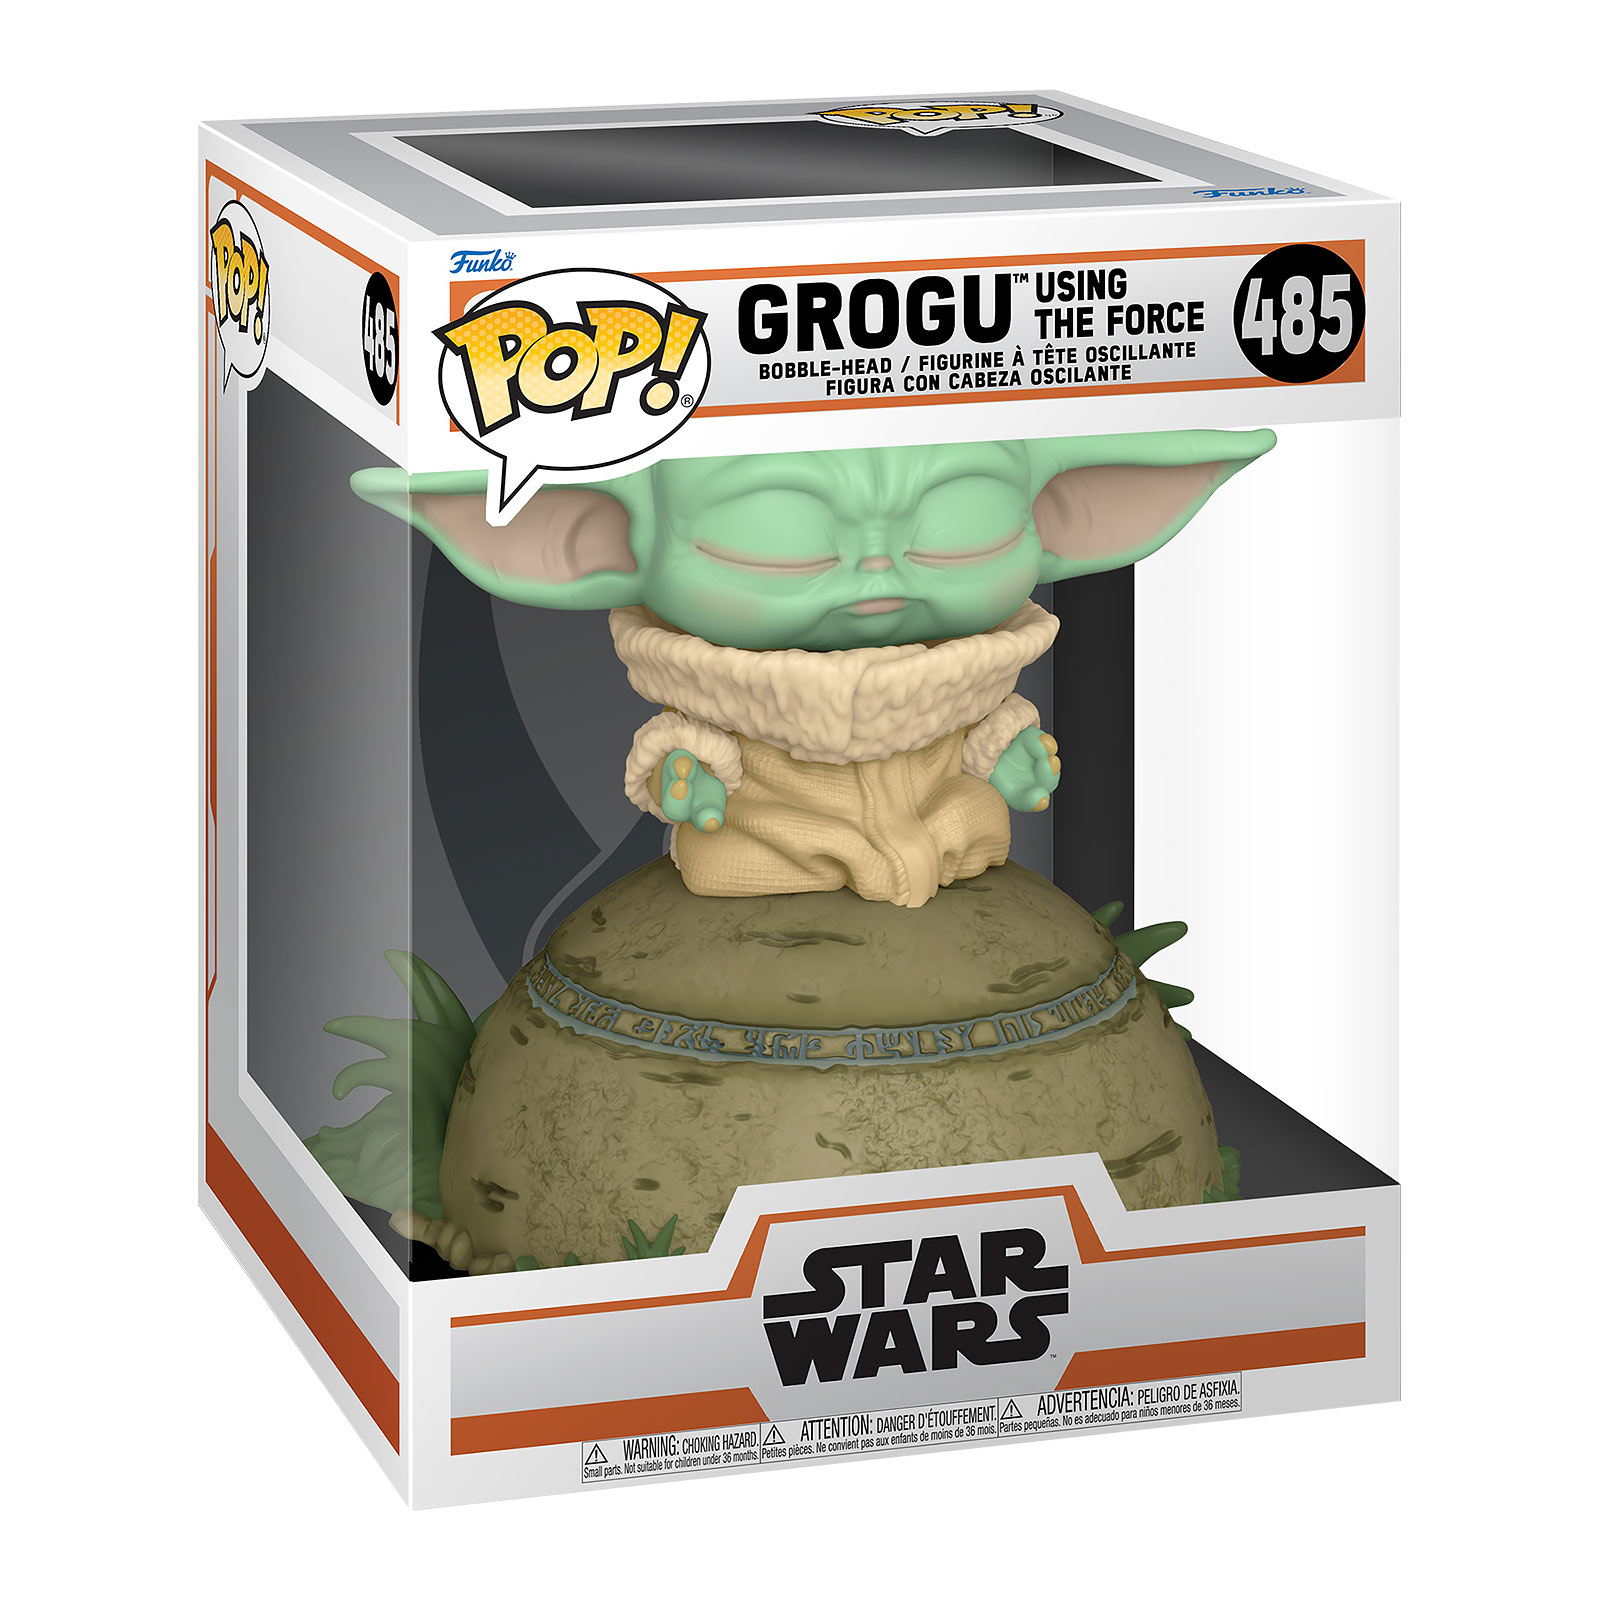 Grogu Using the Force Funko Pop Figure with Light and Sound Effects - Star Wars The Mandalorian